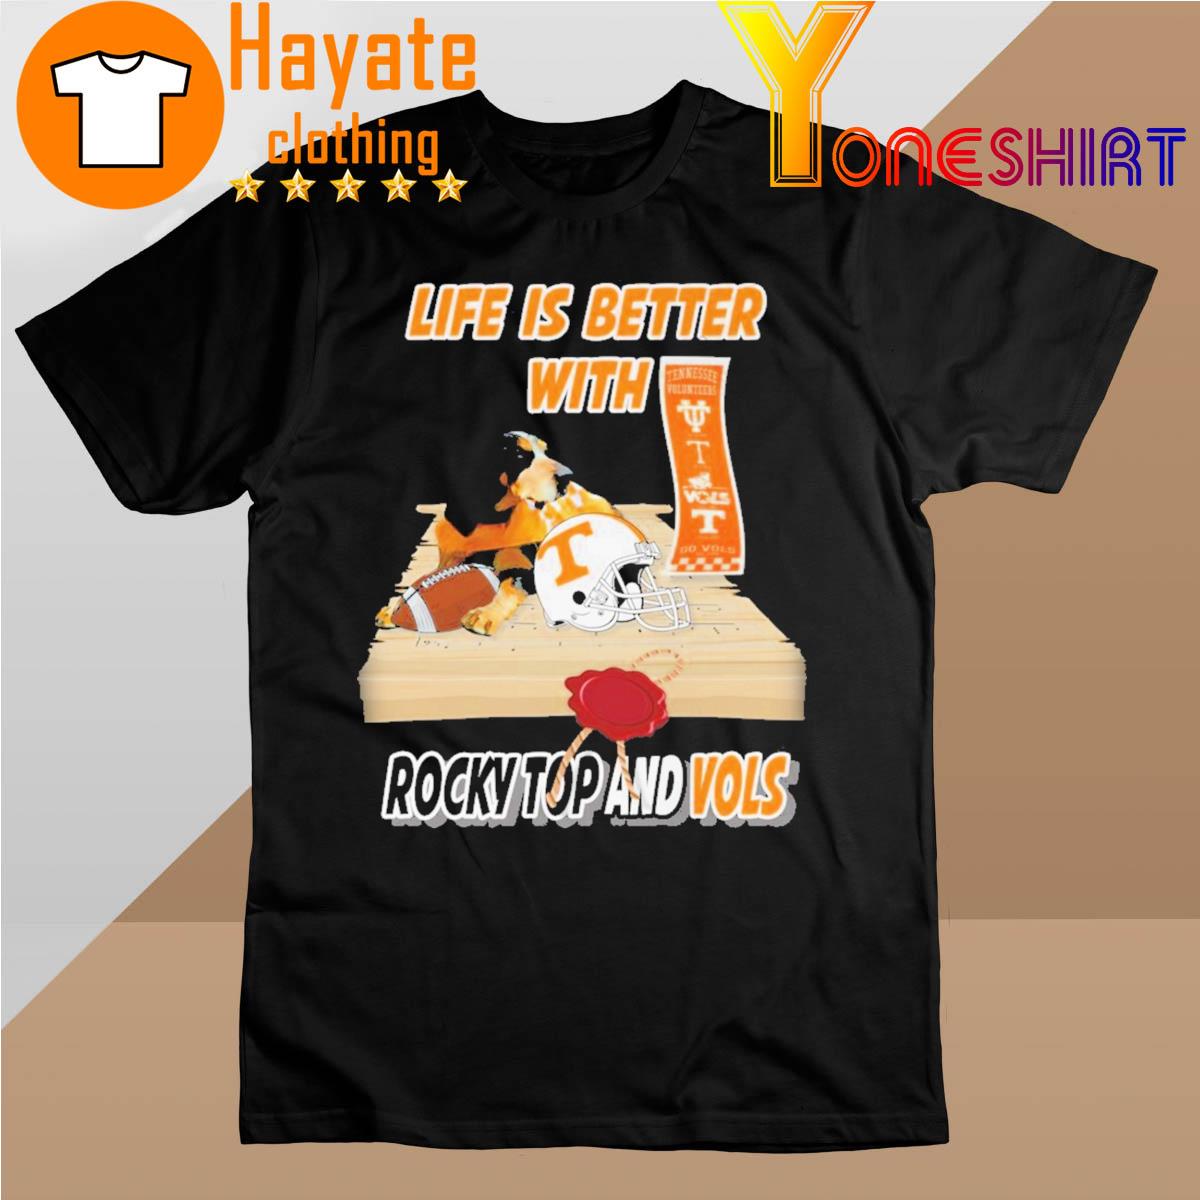 Top Tennessee Volunteers Life is better with Rocky top and Vols shirt